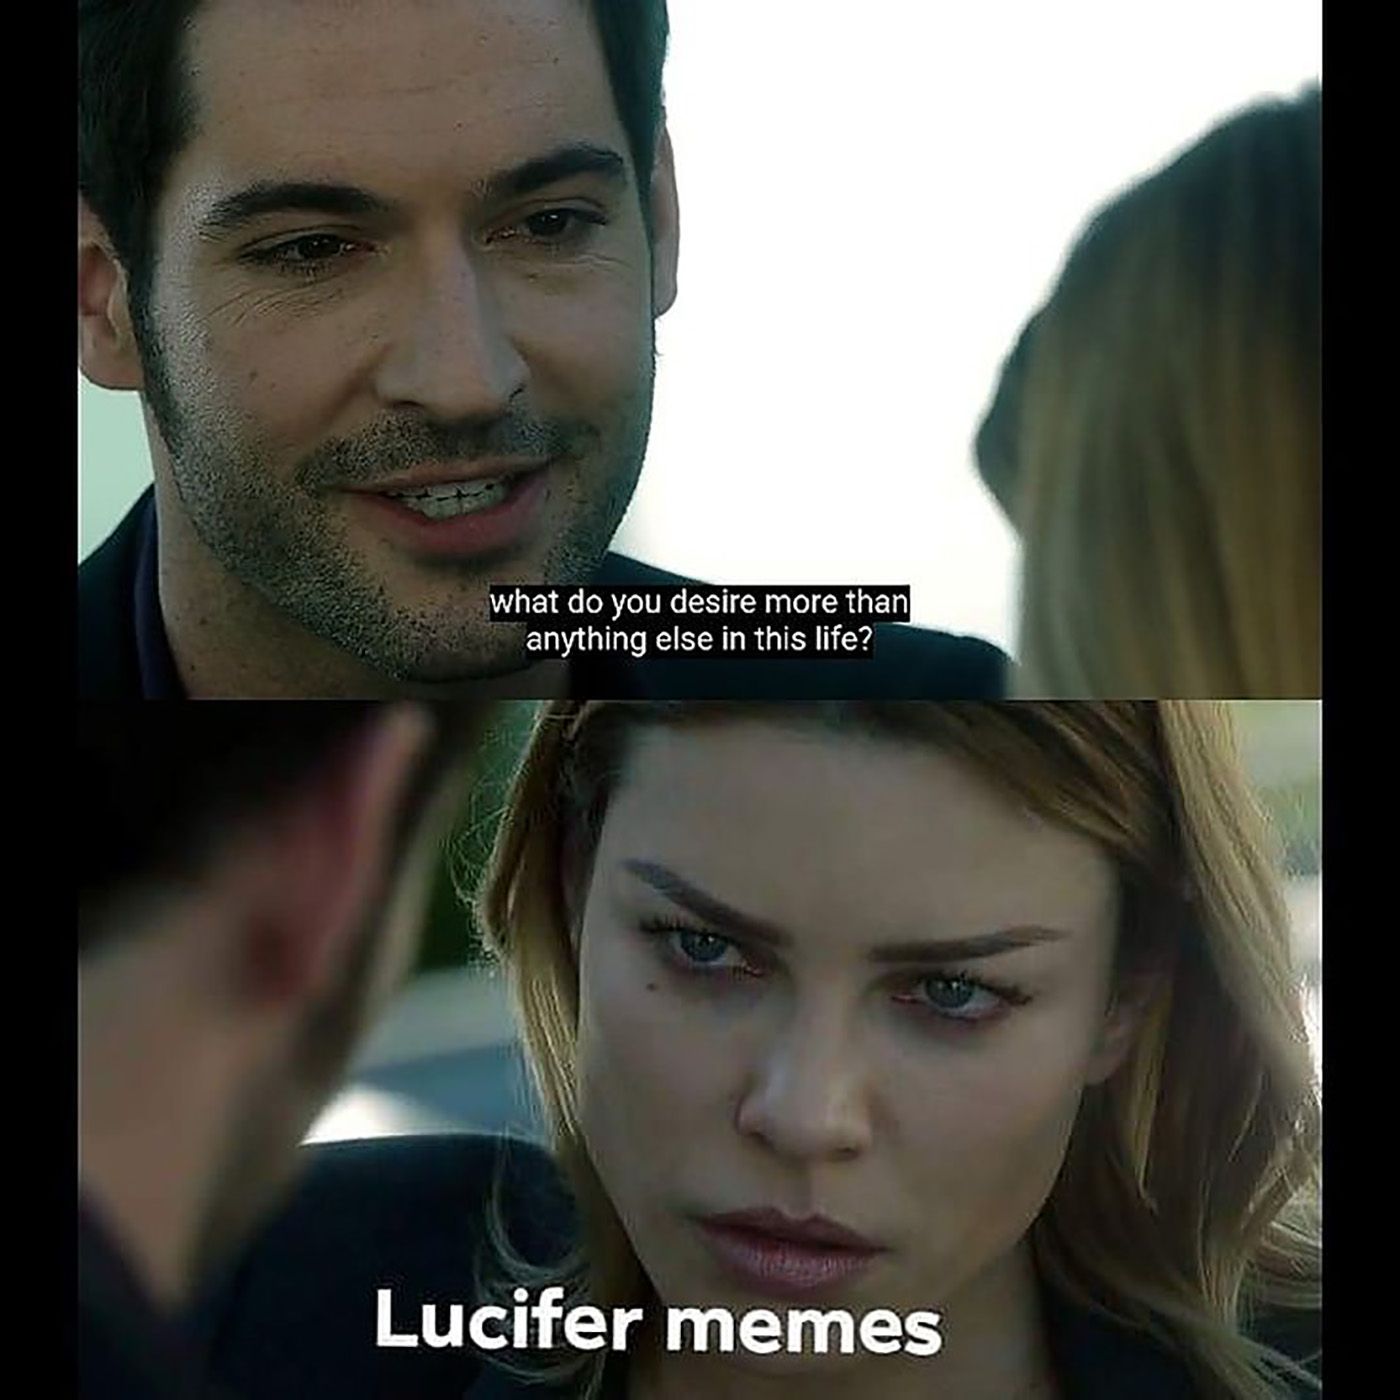 Lucifer asking what you desire and Chloe saying more memes in a meme.